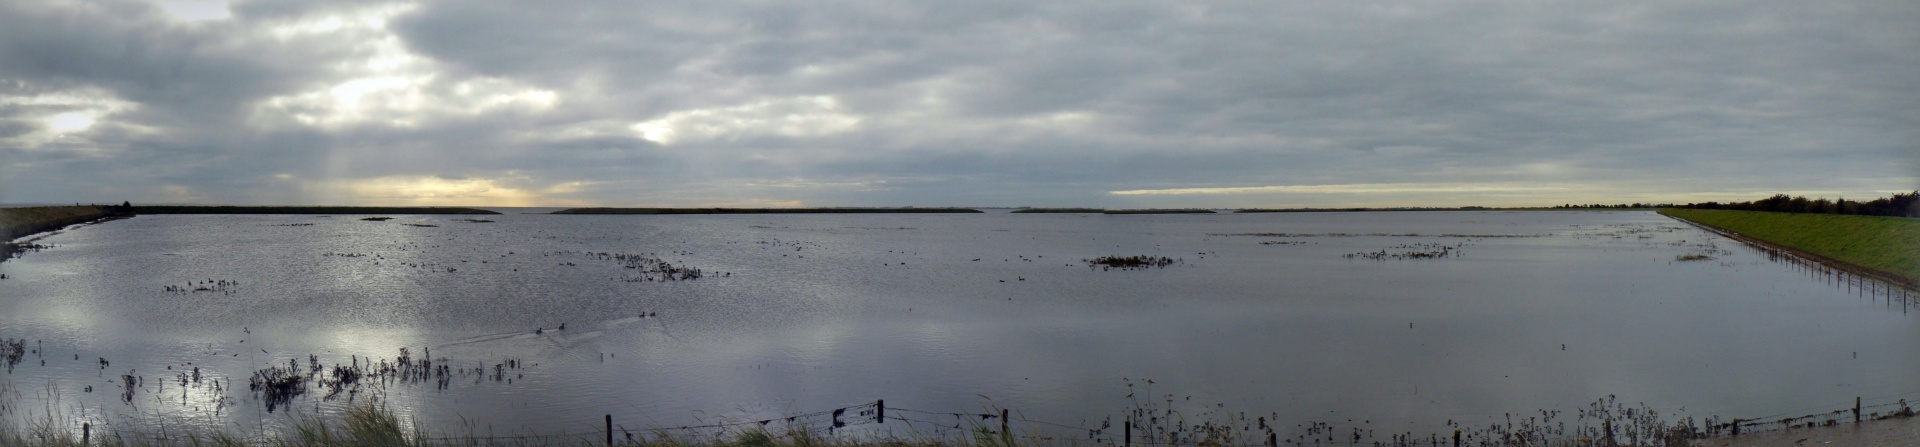 Select this image to see a larger version. P1070079 PANO.
9:42:37am Wed 19 Oct 2016.
RSPB Freiston Shore, Flooded Salt Marsh at Spring Tide.
